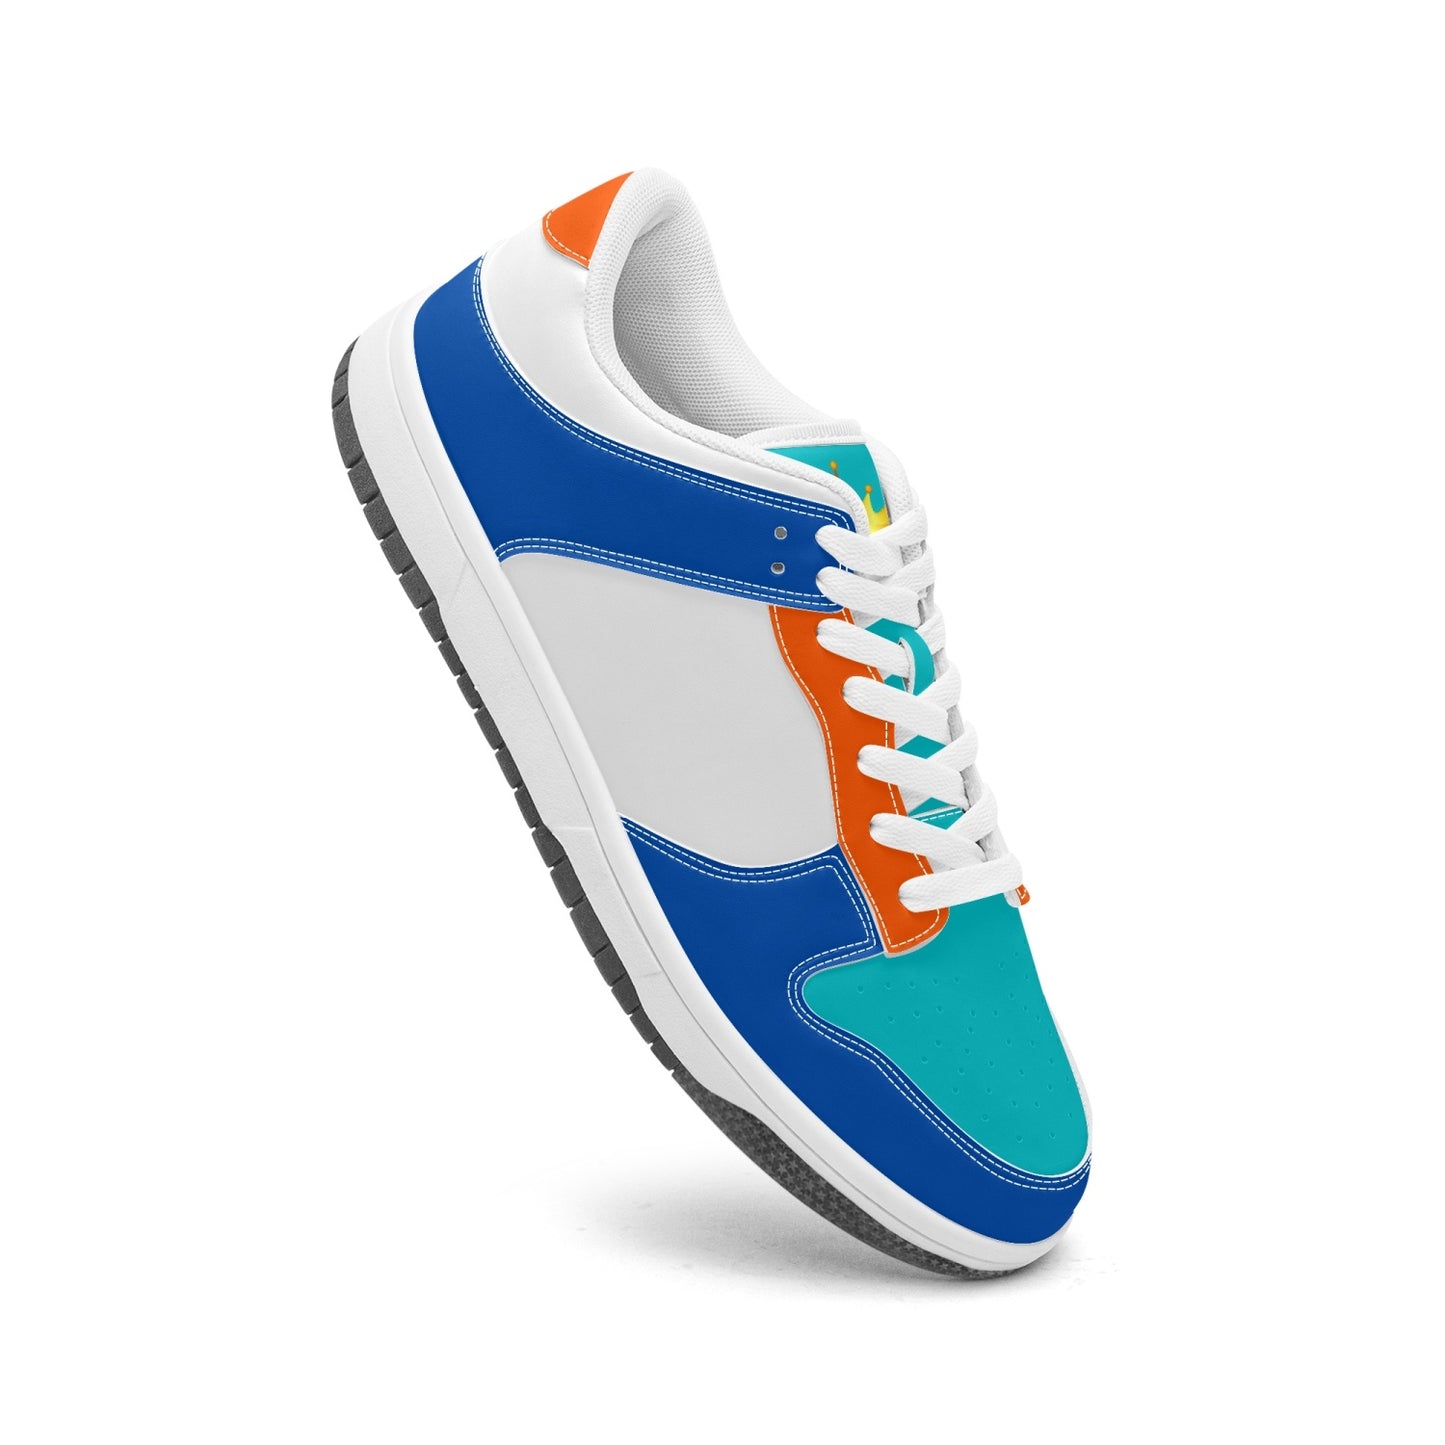 Kicxs Team Dolphins Sneakers